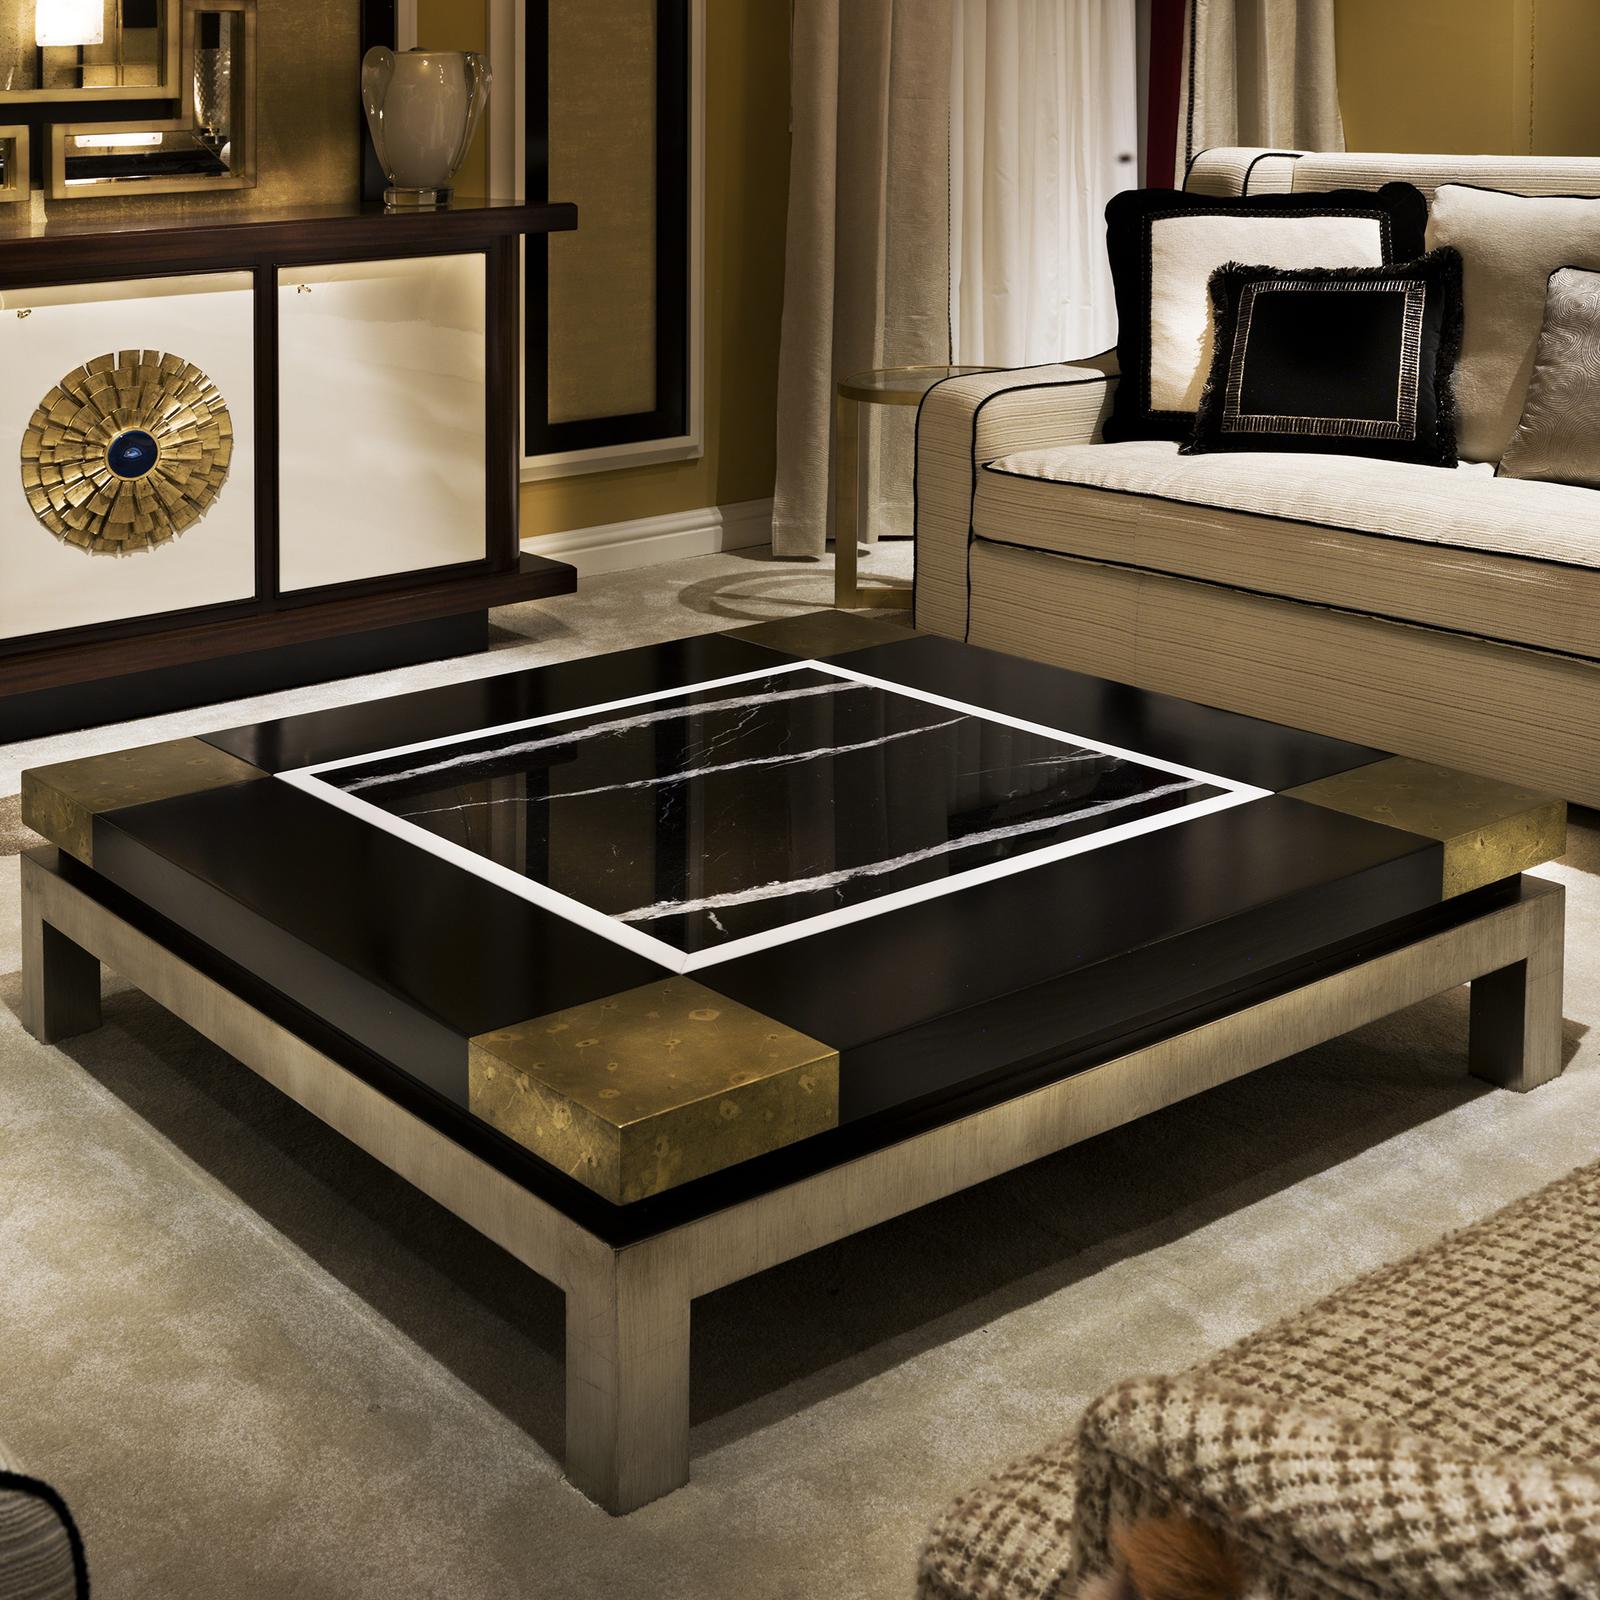 A magnificent piece of functional decor, this coffee table is sure to make a statement in any decor. Its large, square base is in wood and was hand painted with silver leaf. The wooden top was painted by hand in black with corners in gold leaf. The